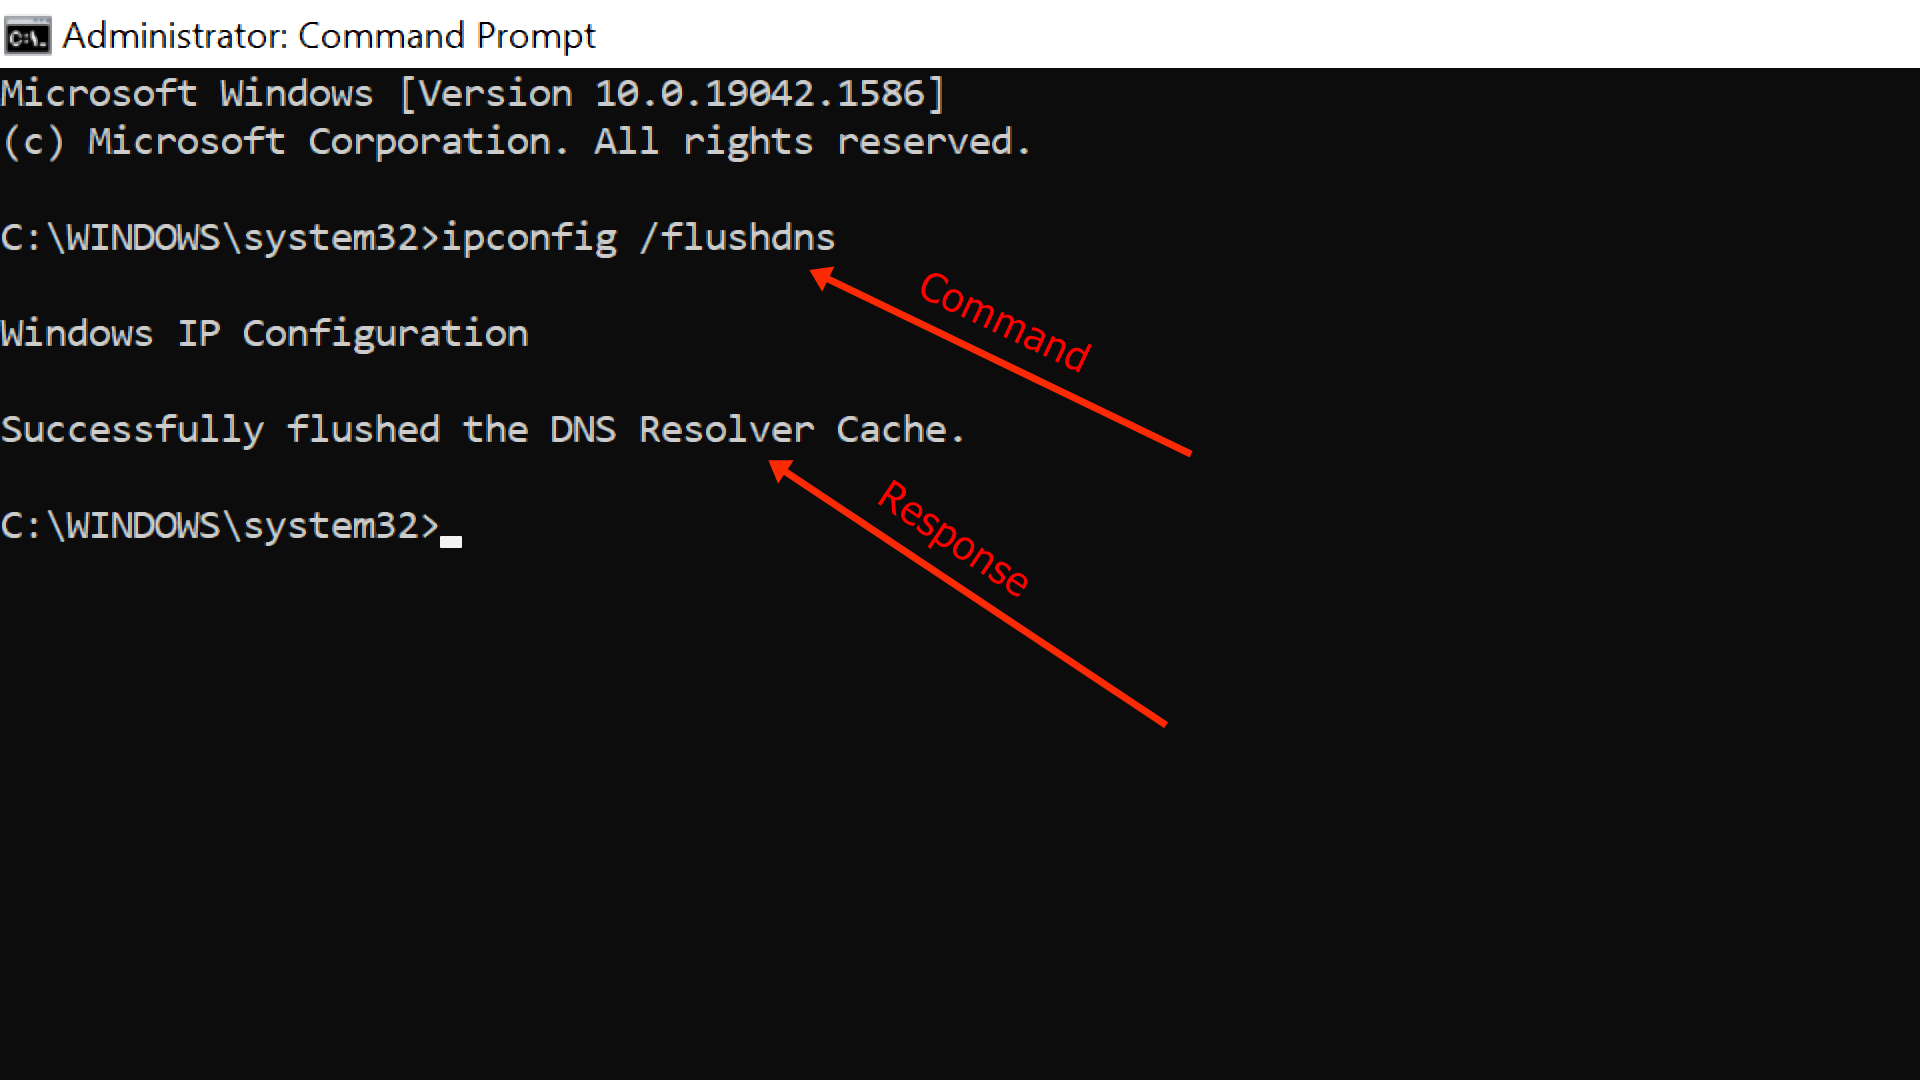 Open Command Prompt by pressing Windows key + R and typing cmd
Type ipconfig /flushdns and press Enter